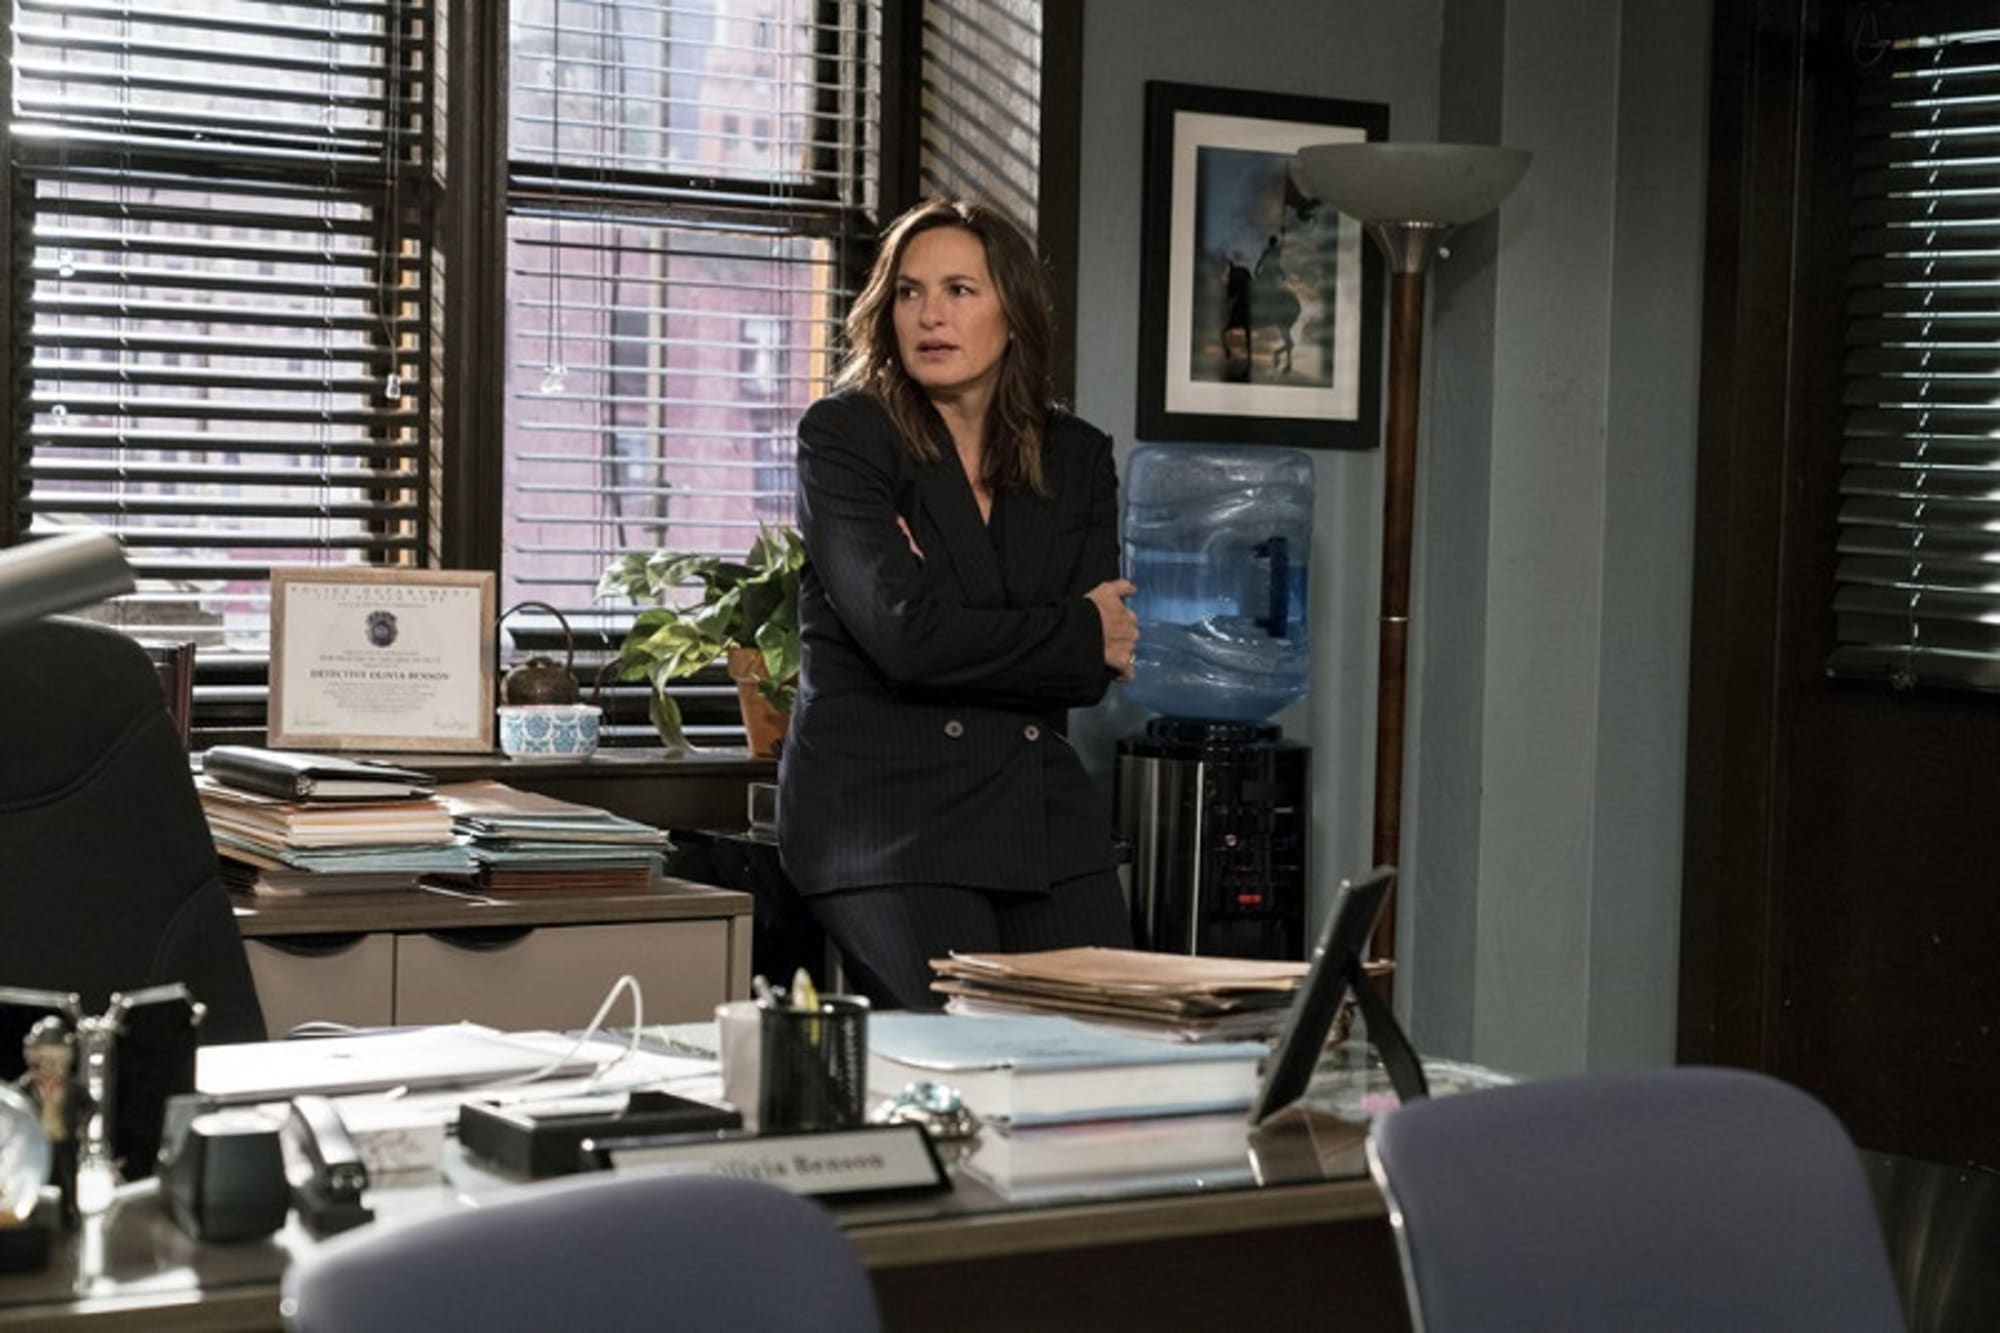 law and order svu online free full episodes.